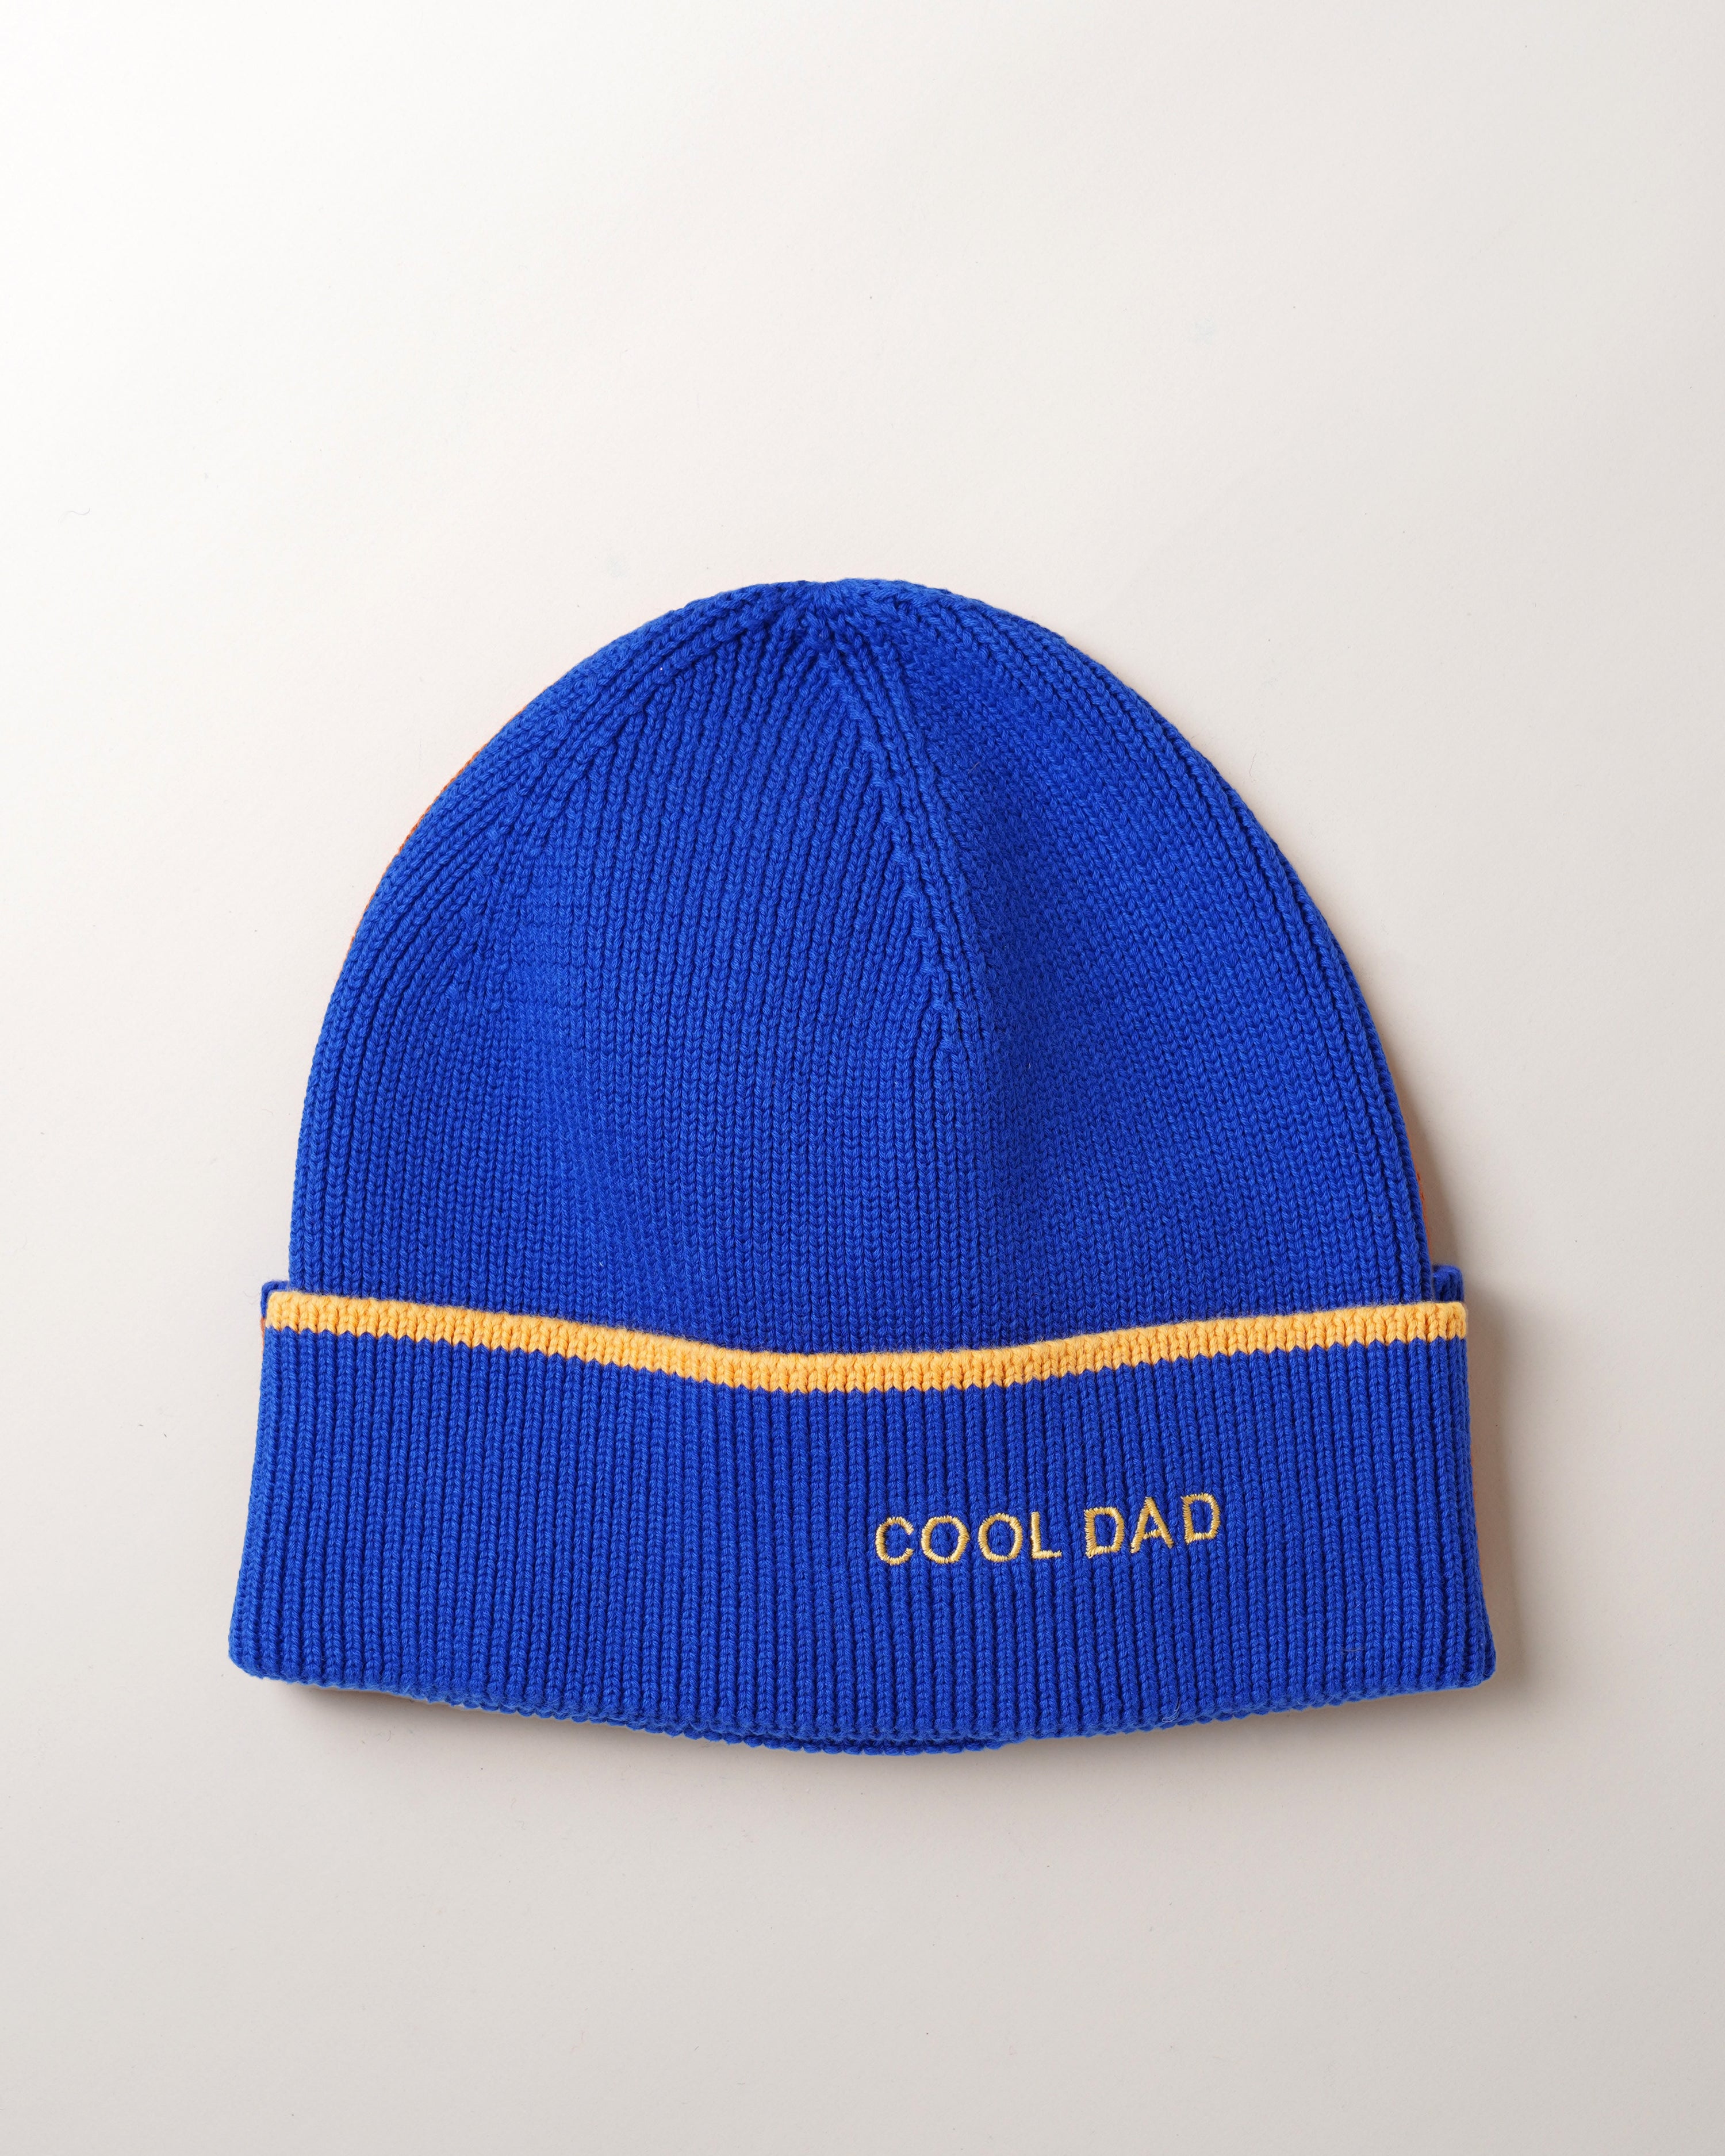 Cool Dad Beanie/Adult